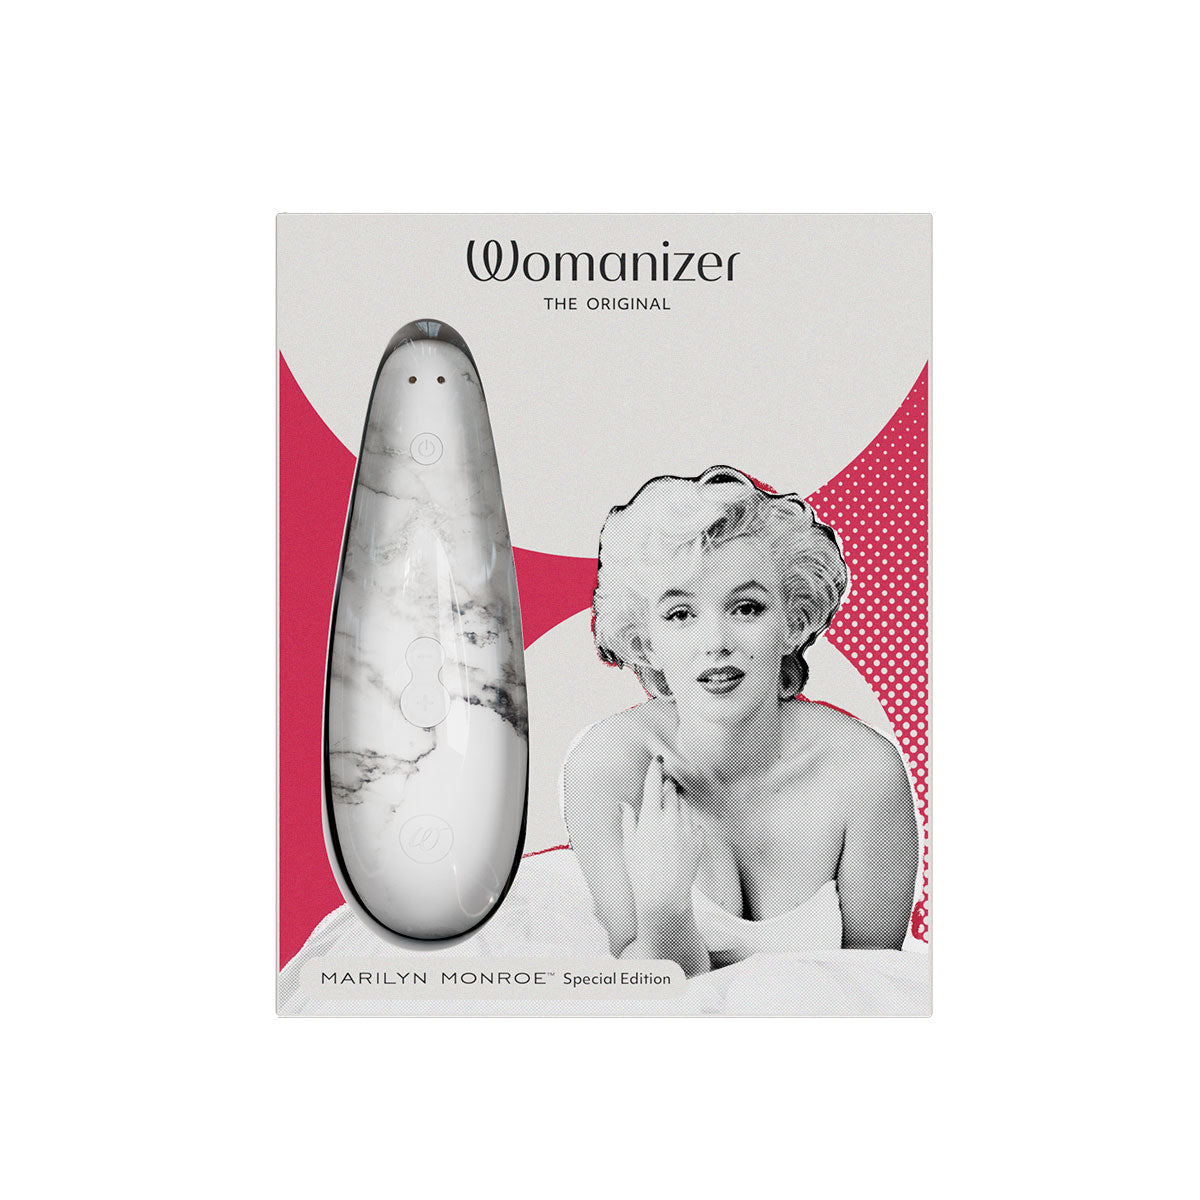 Womanizer Classic 2 Marilyn Monroe Special Edition - White Marble Intimates Adult Boutique